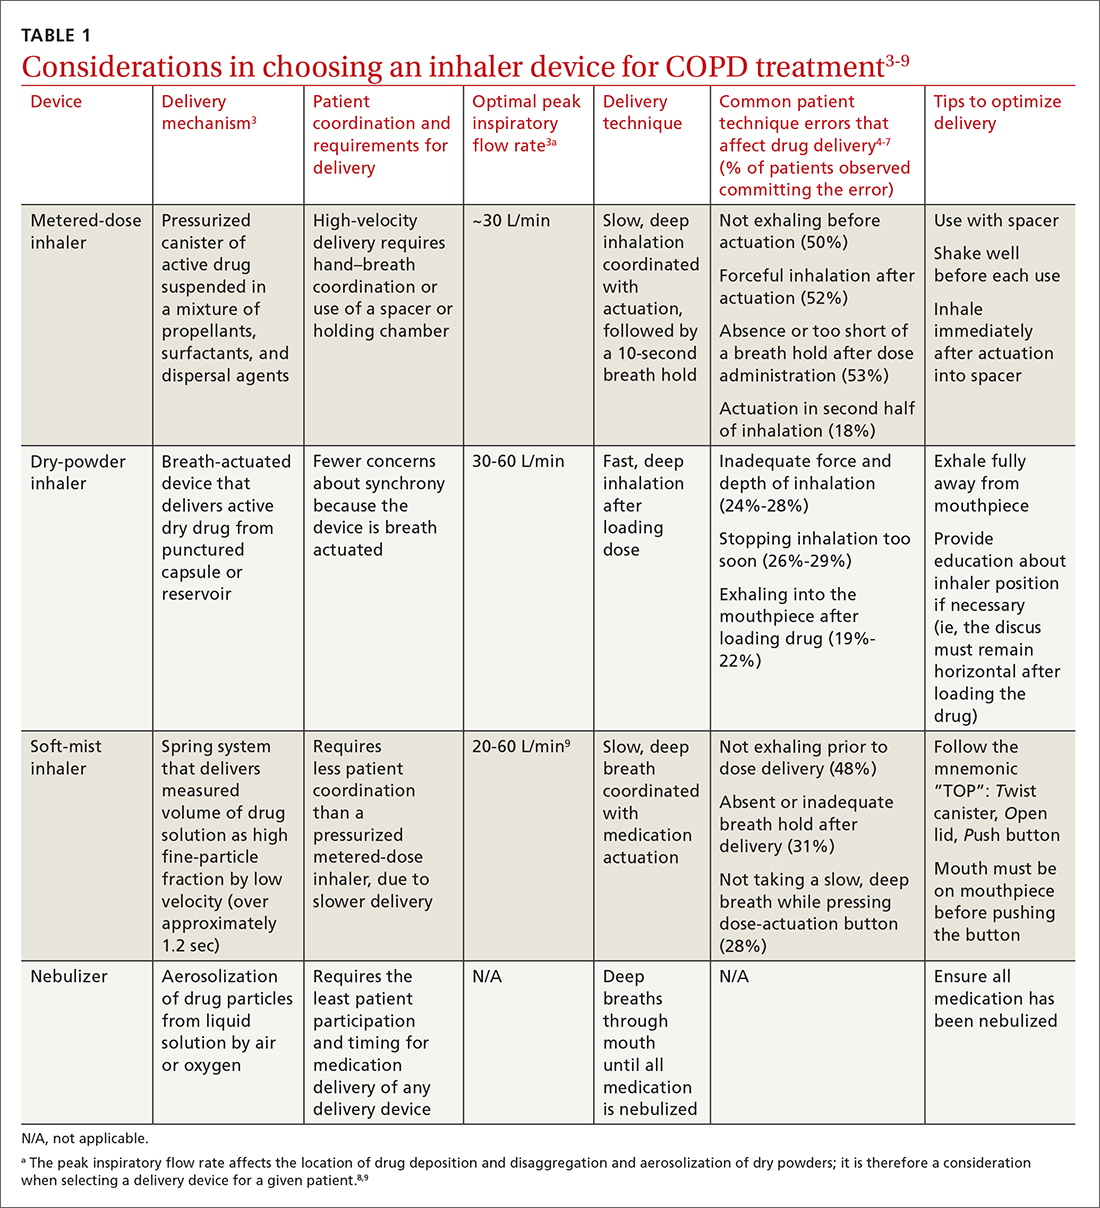 Considerations in choosing an inhaler device for COPD treatment